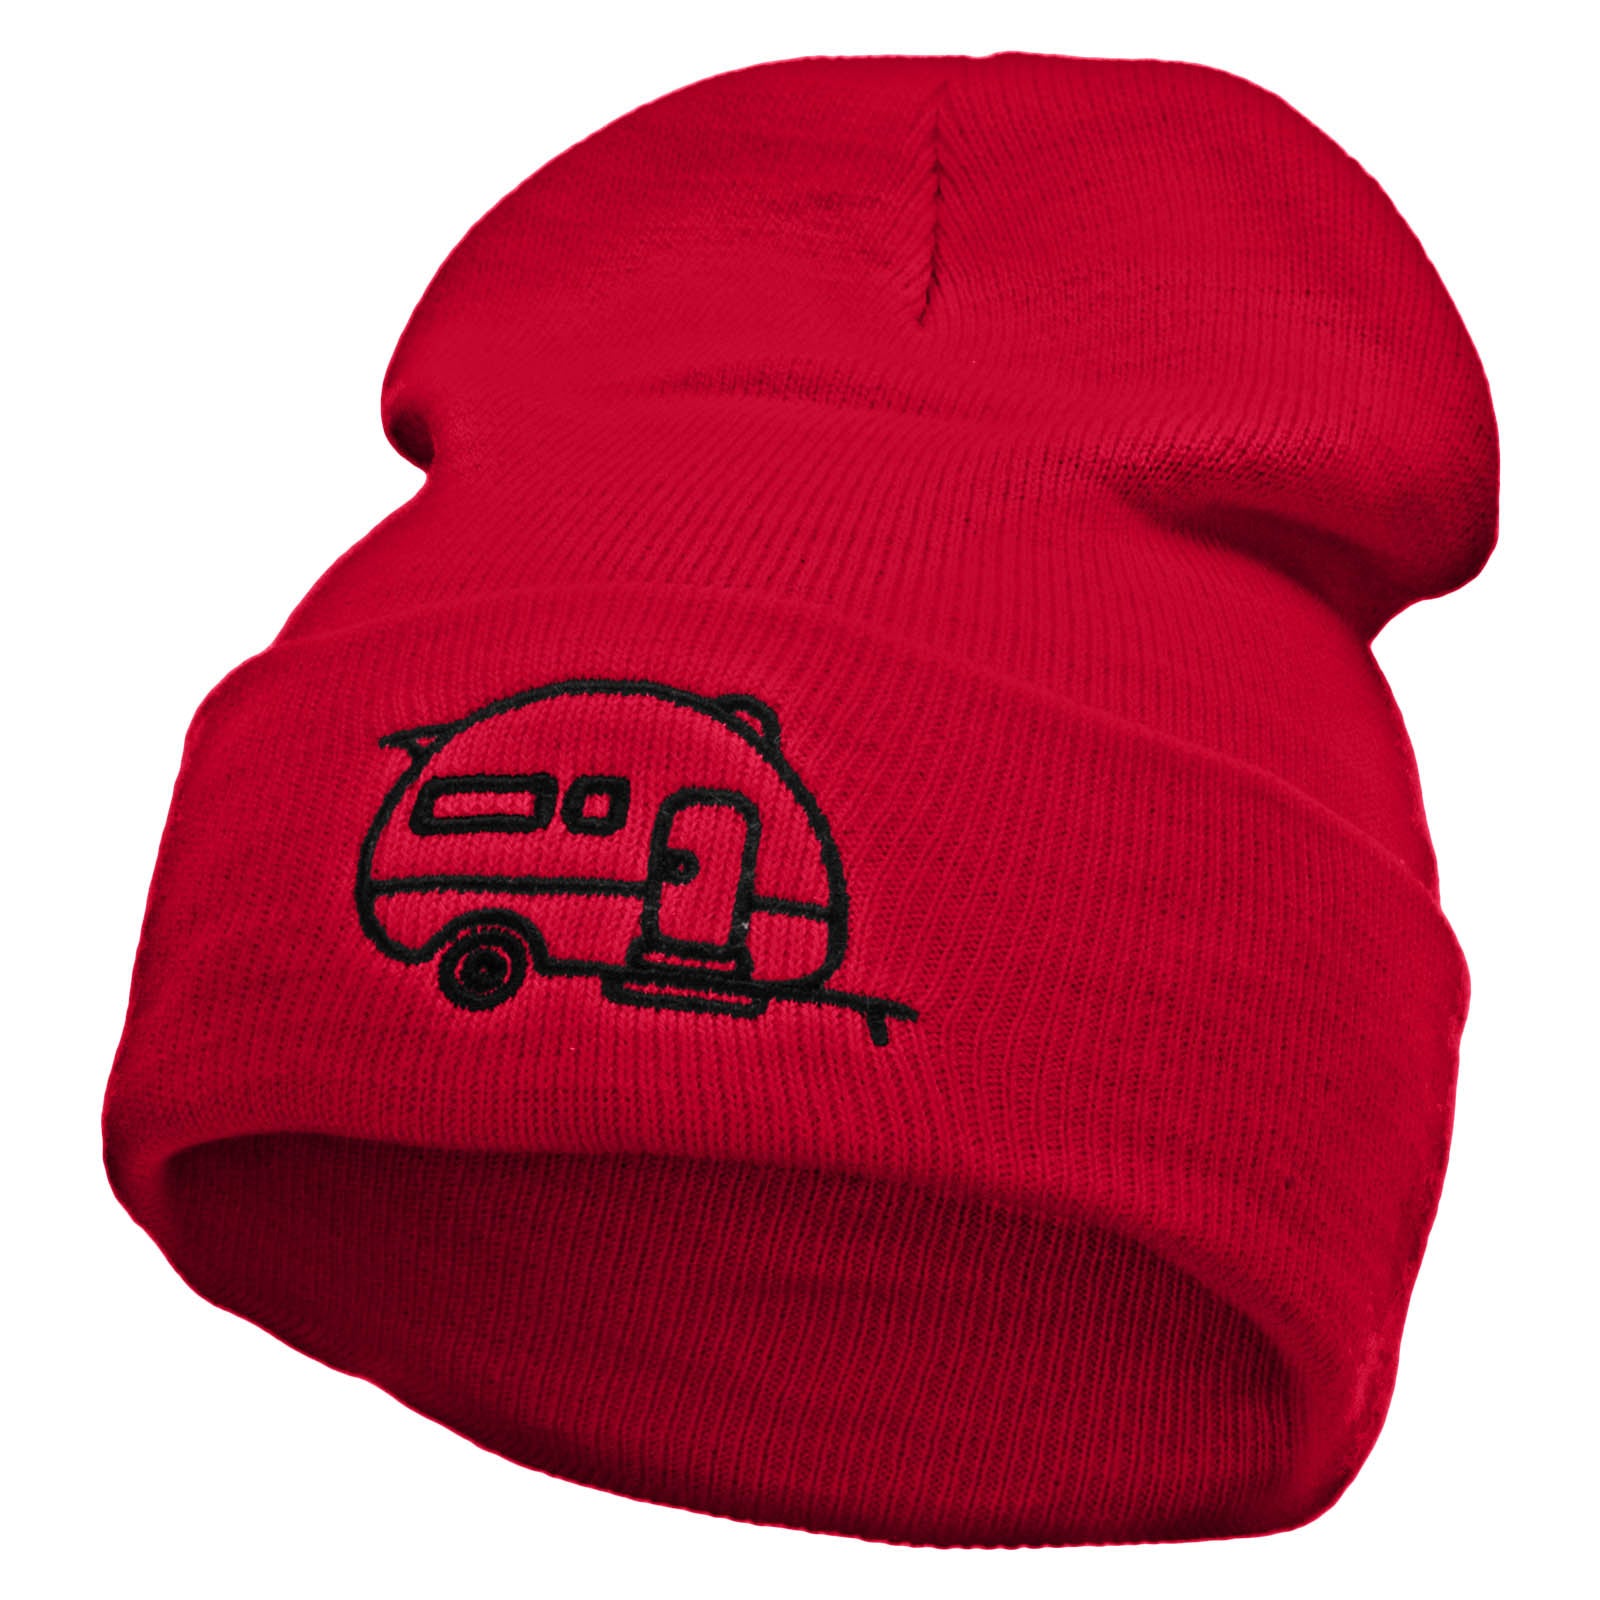 RV Camper Trailer Embroidered 12 inch Acrylic Cuffed Long Beanie - Red OSFM